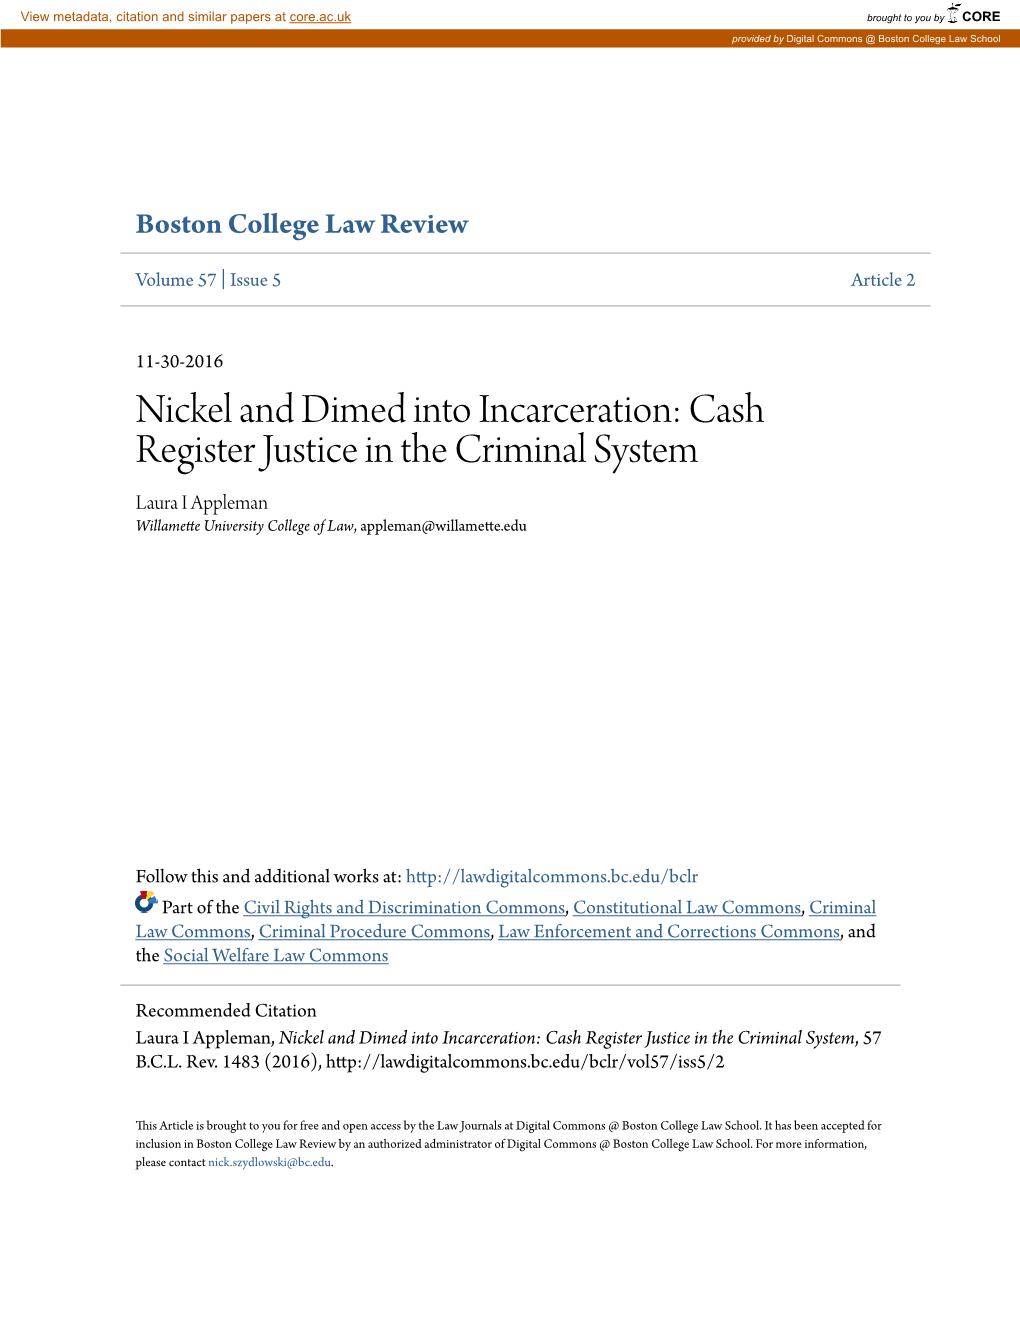 Nickel and Dimed Into Incarceration: Cash Register Justice in the Criminal System Laura I Appleman Willamette University College of Law, Appleman@Willamette.Edu